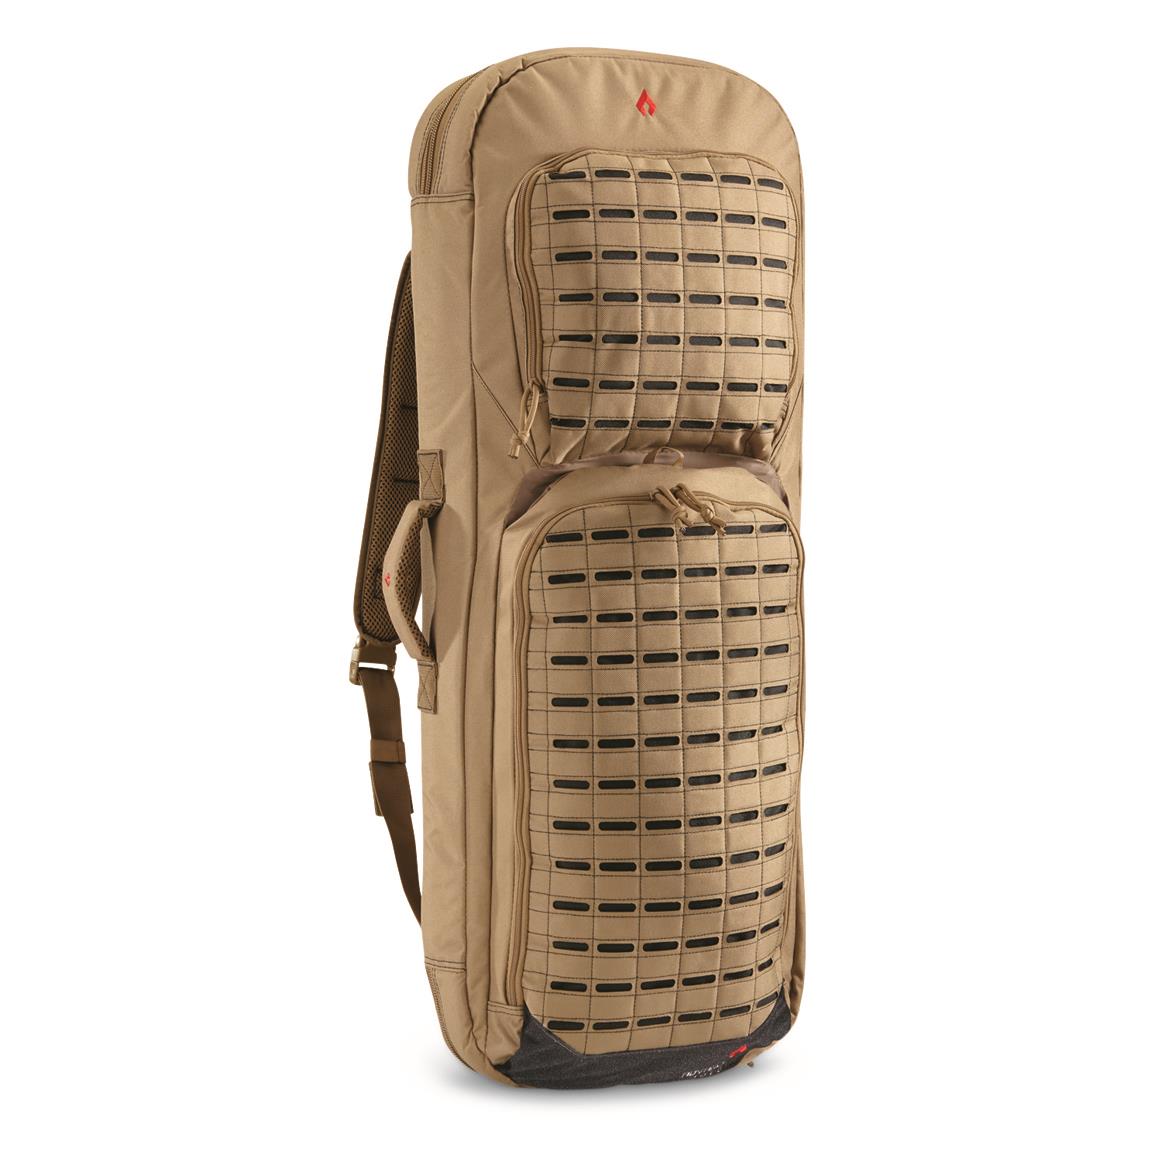 Rugged, water-resistant 600D polyester fabric, Tan